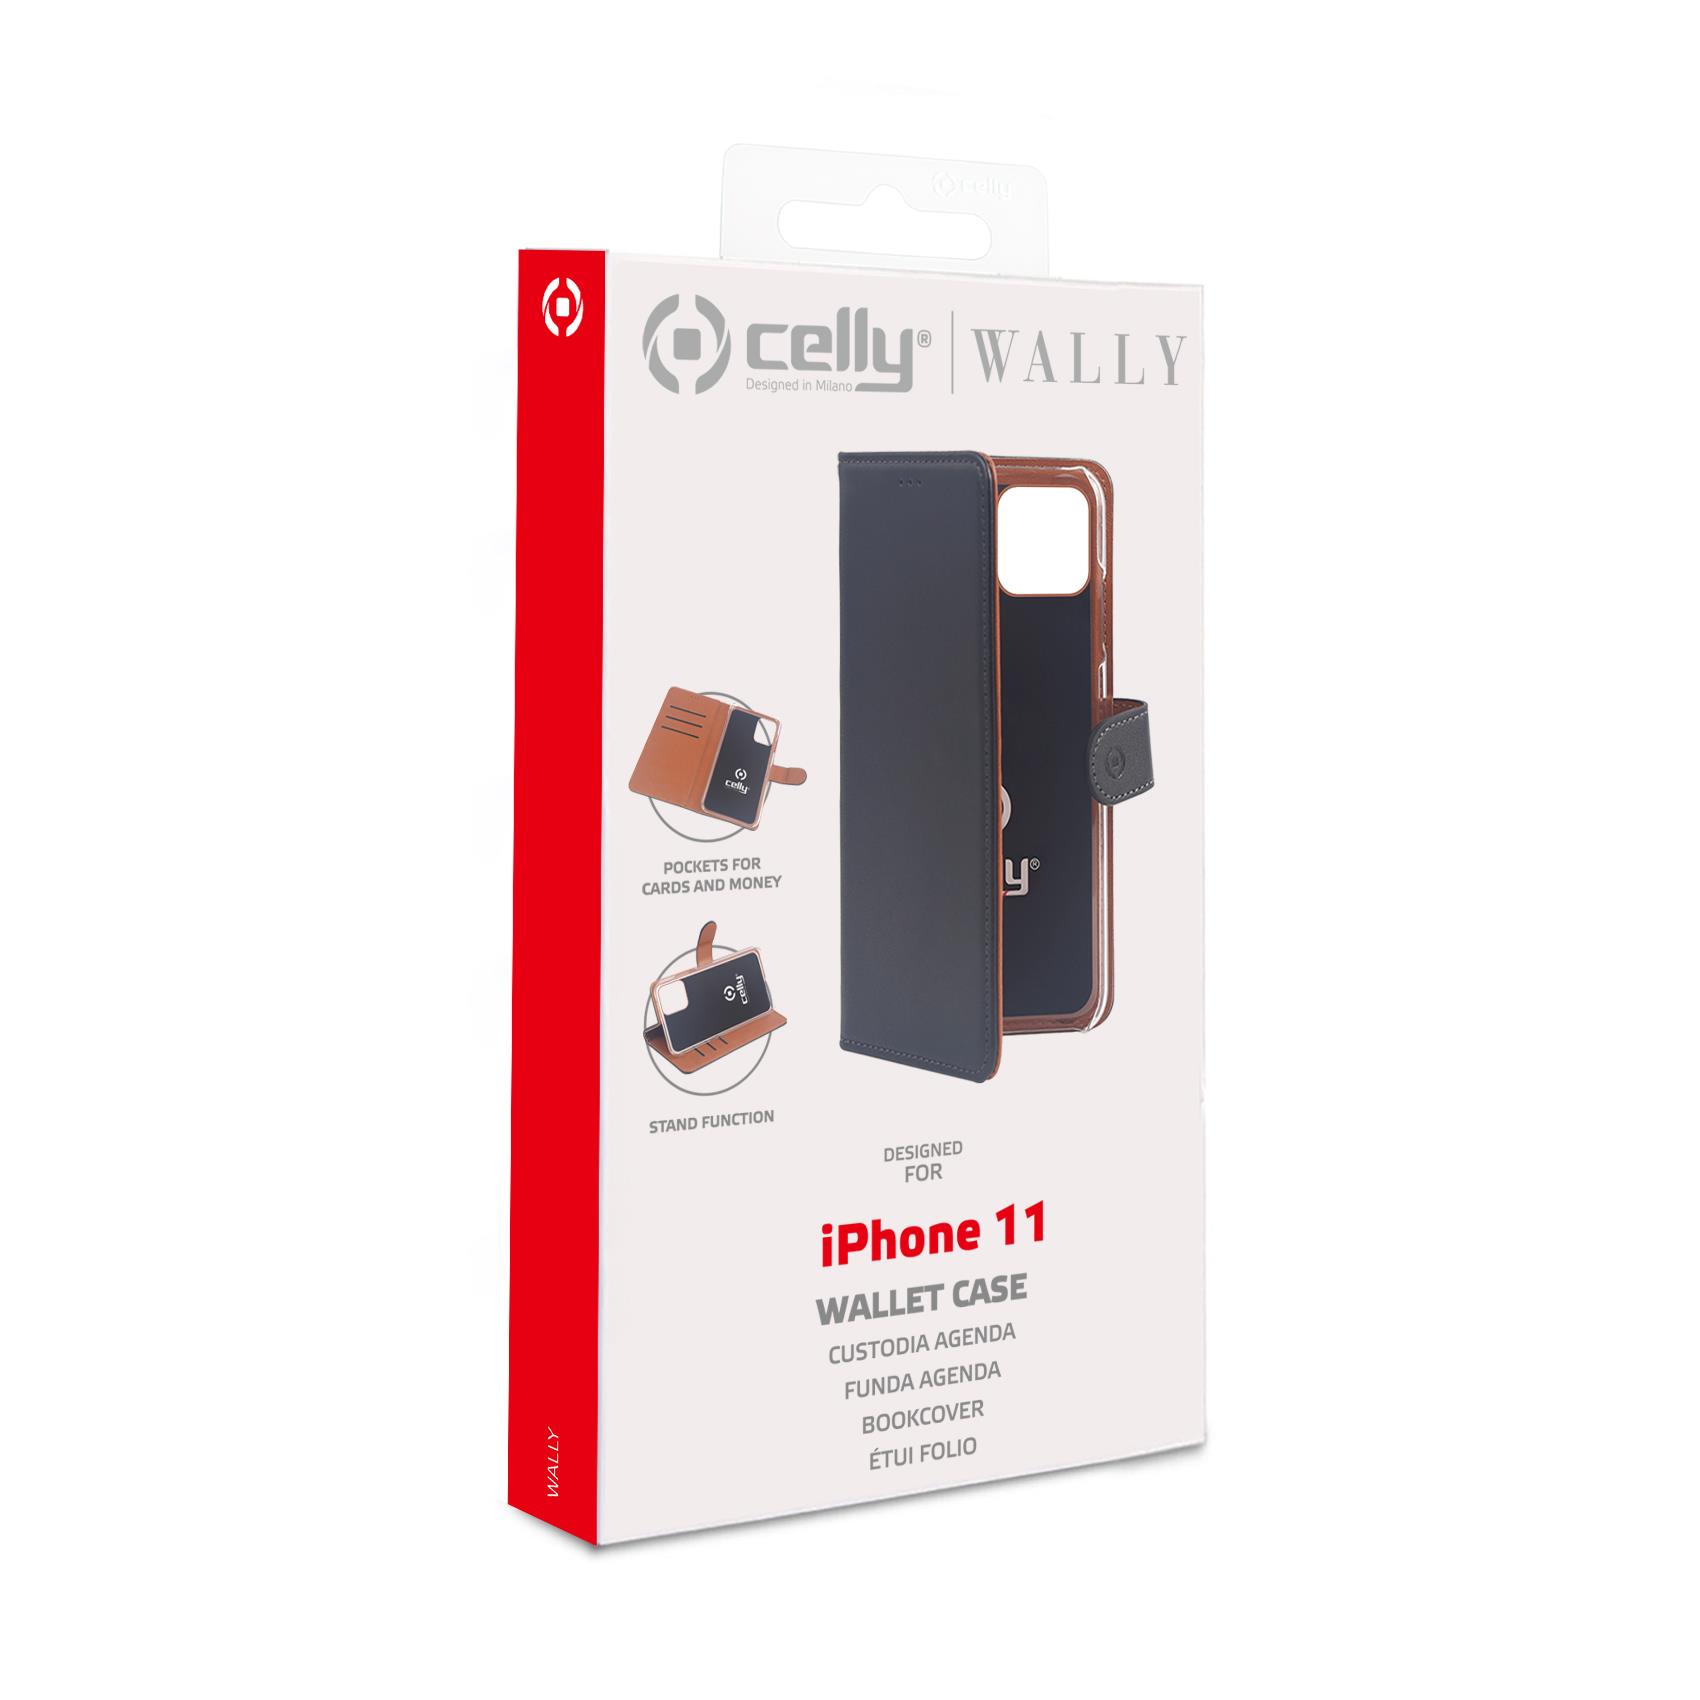 Wally Case Iphone 11 Black Celly Wally1001 8021735752493